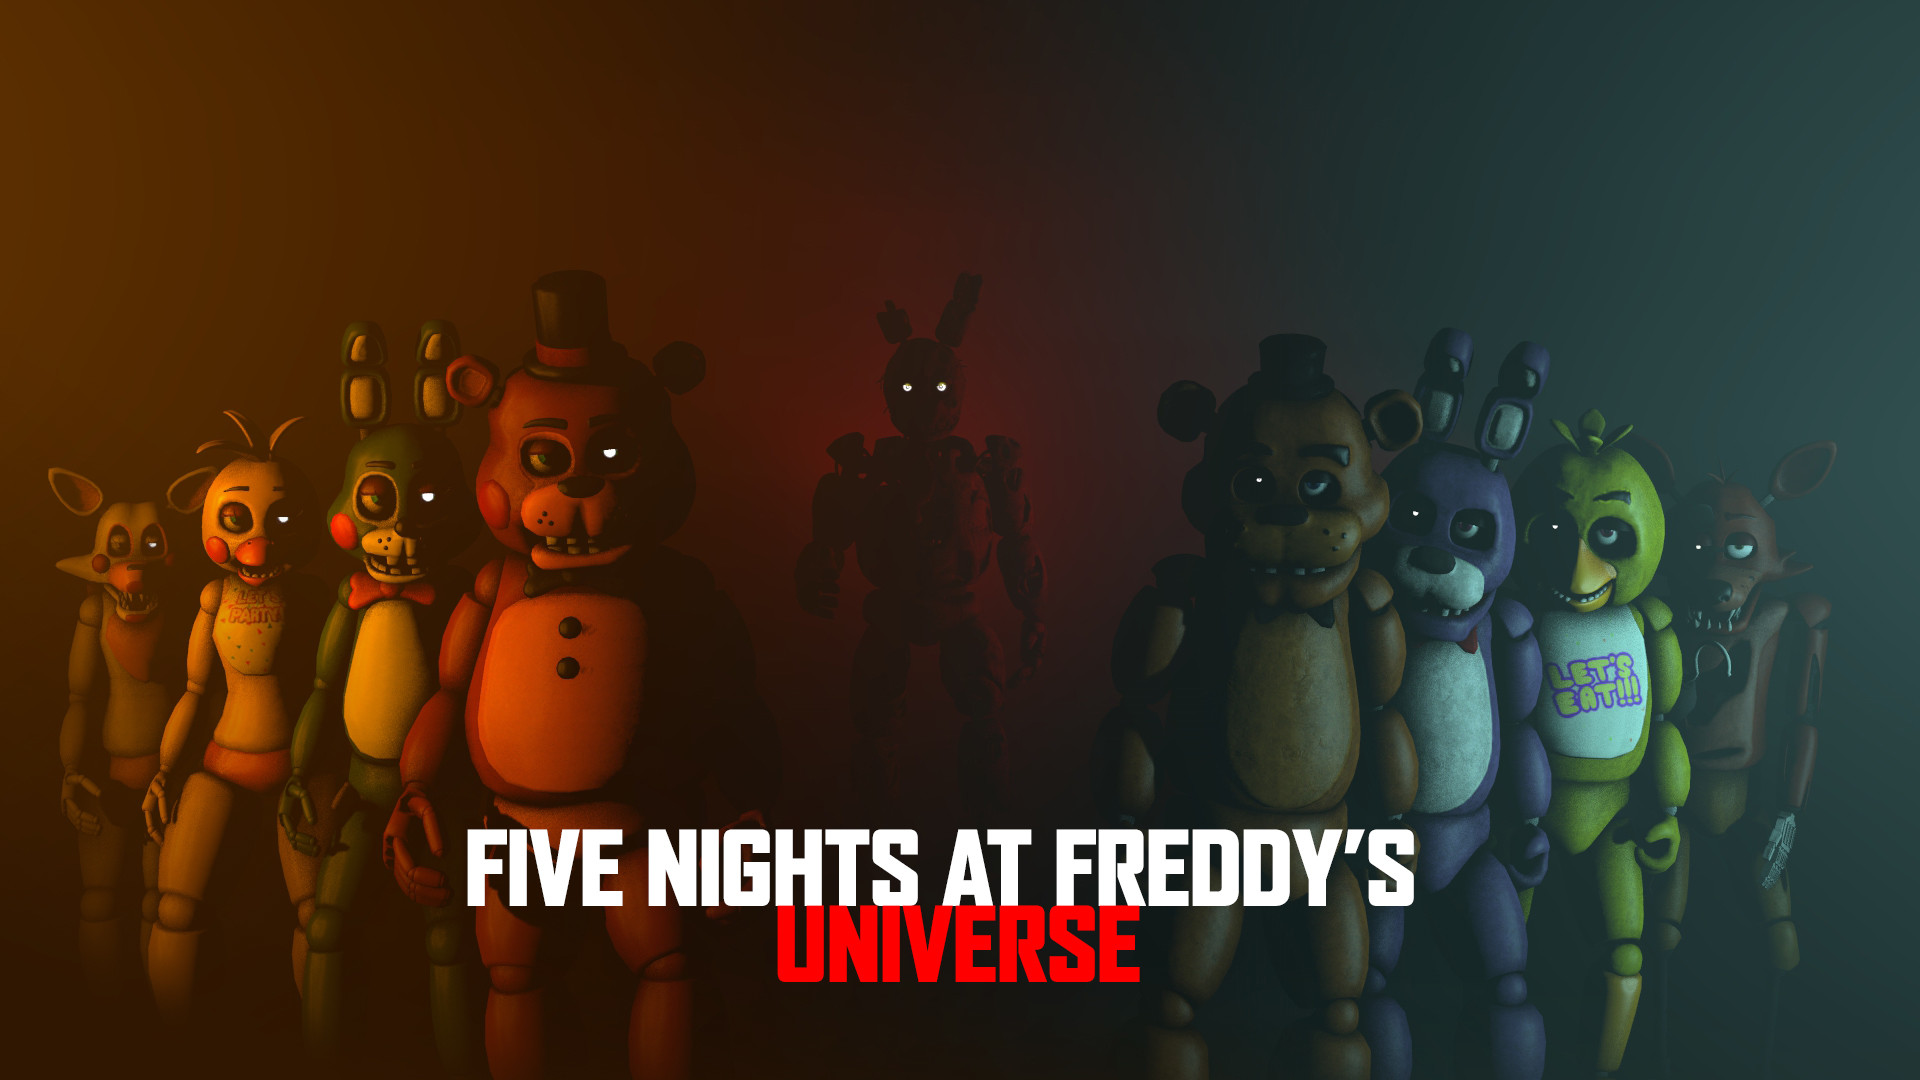 1920x1080 Five Nights at Freddy's by Trycon1980 Five Nights at Freddy's by Trycon1980